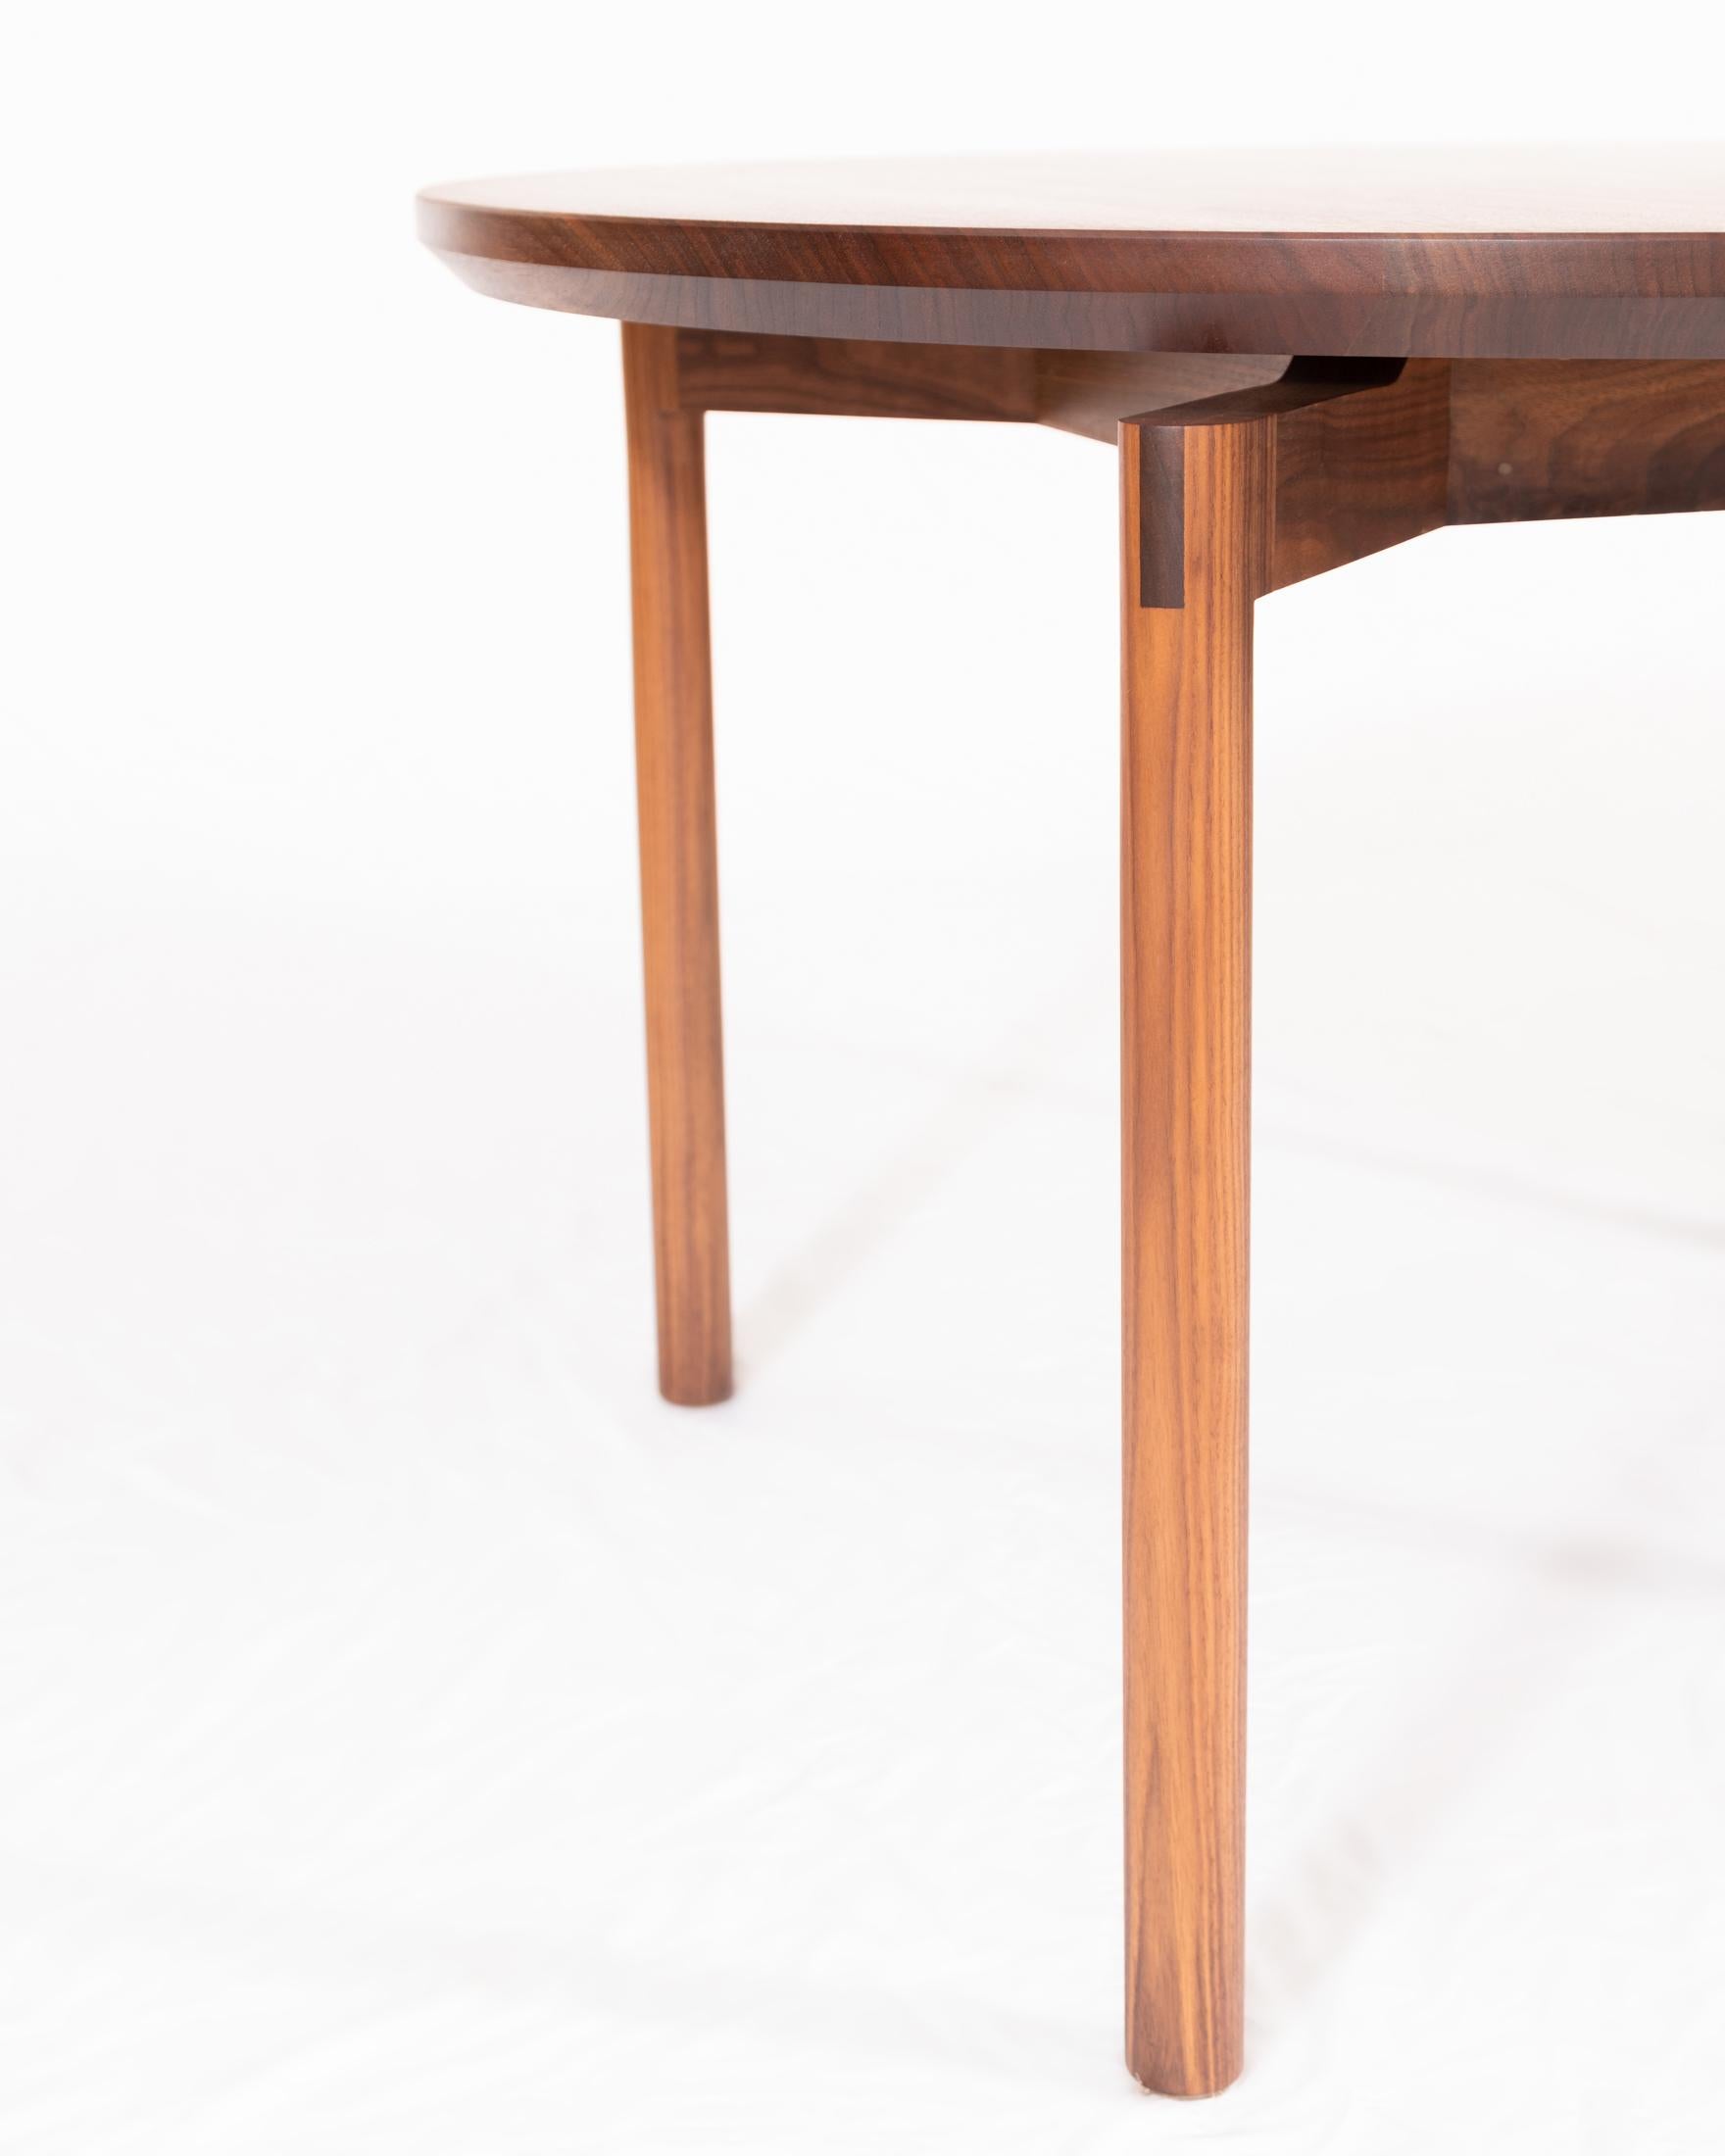 American Enso Table, Walnut Dining Table with Knife-Edge and Exposed Joinery For Sale